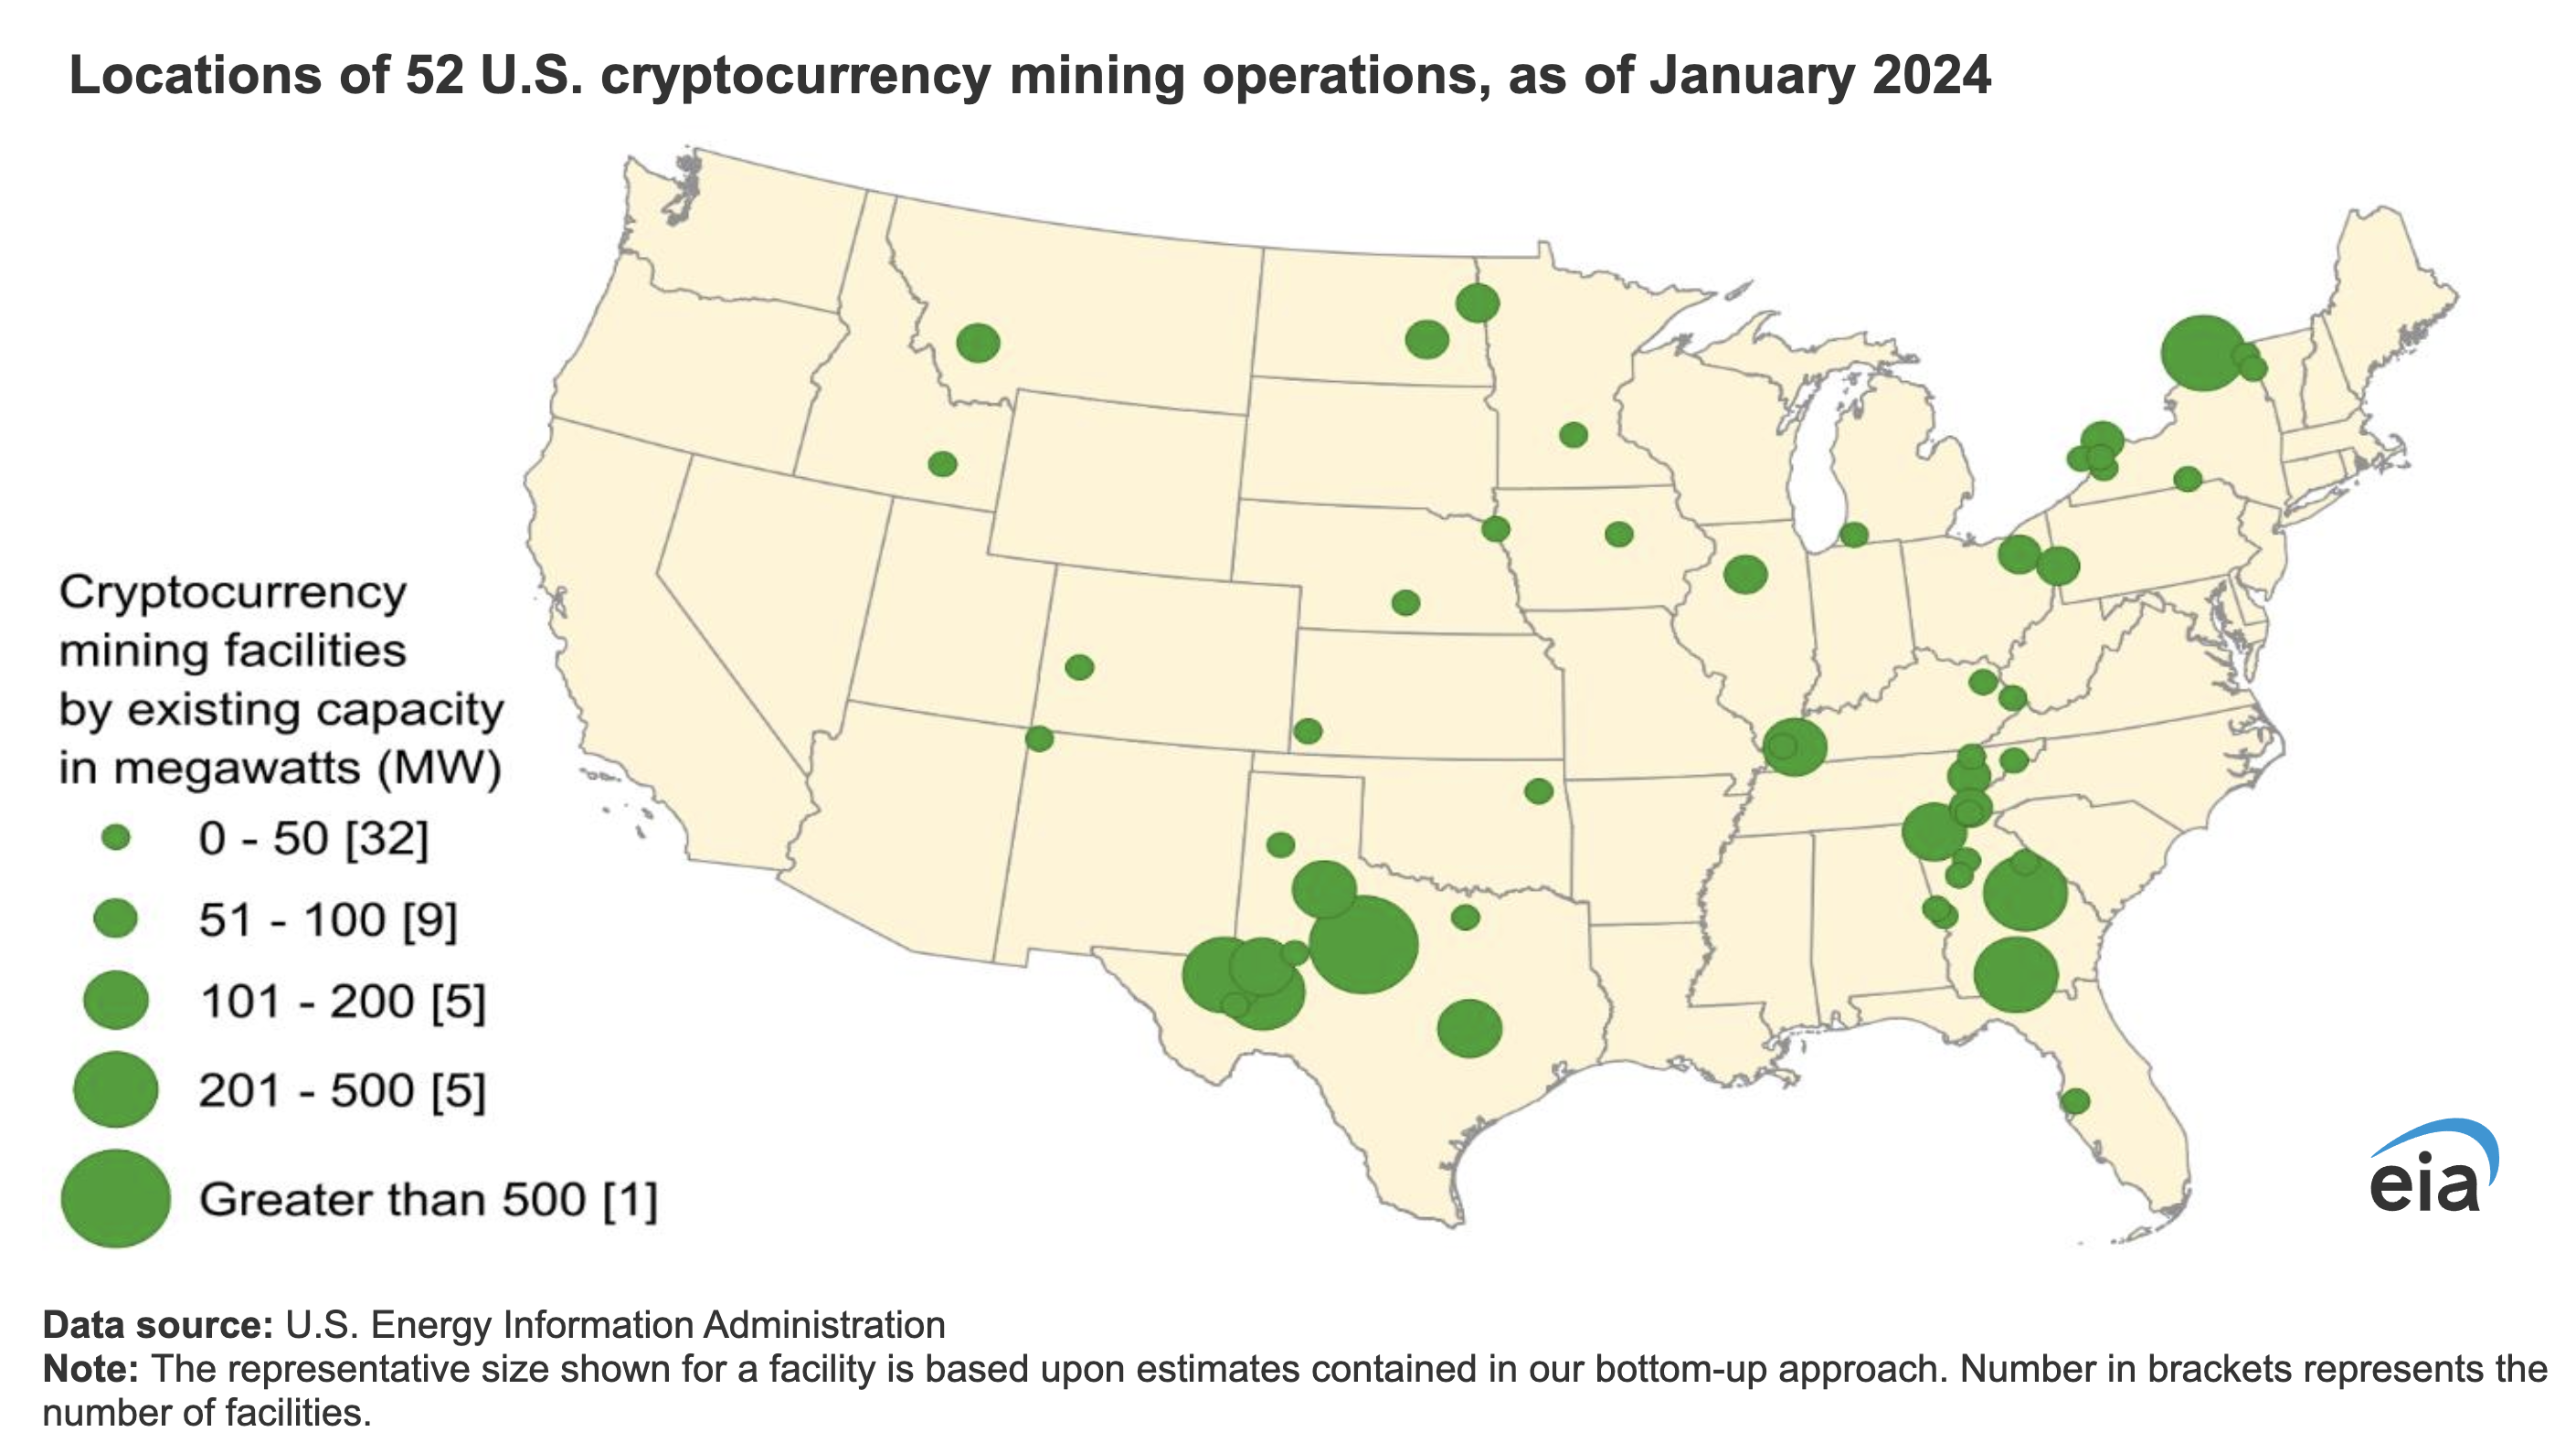 Tracking Electricity Consumption From U.S. Cryptocurrency Mining Operations